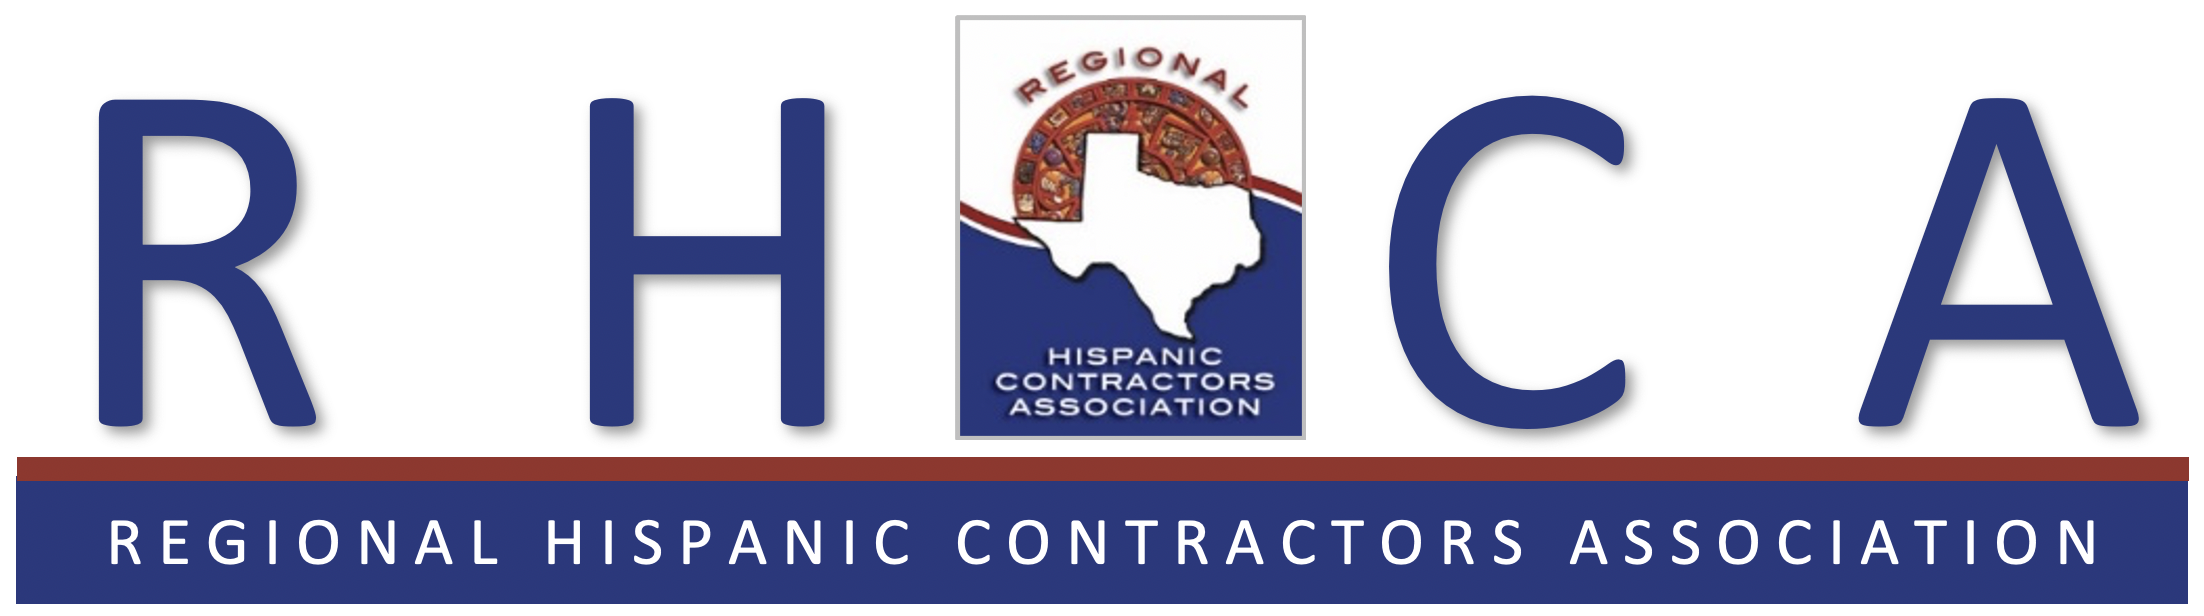 The logo for the Regional Hispanic Contractors Association with blue letters "RHCA" beside an image of Texas in red, white, and blue.